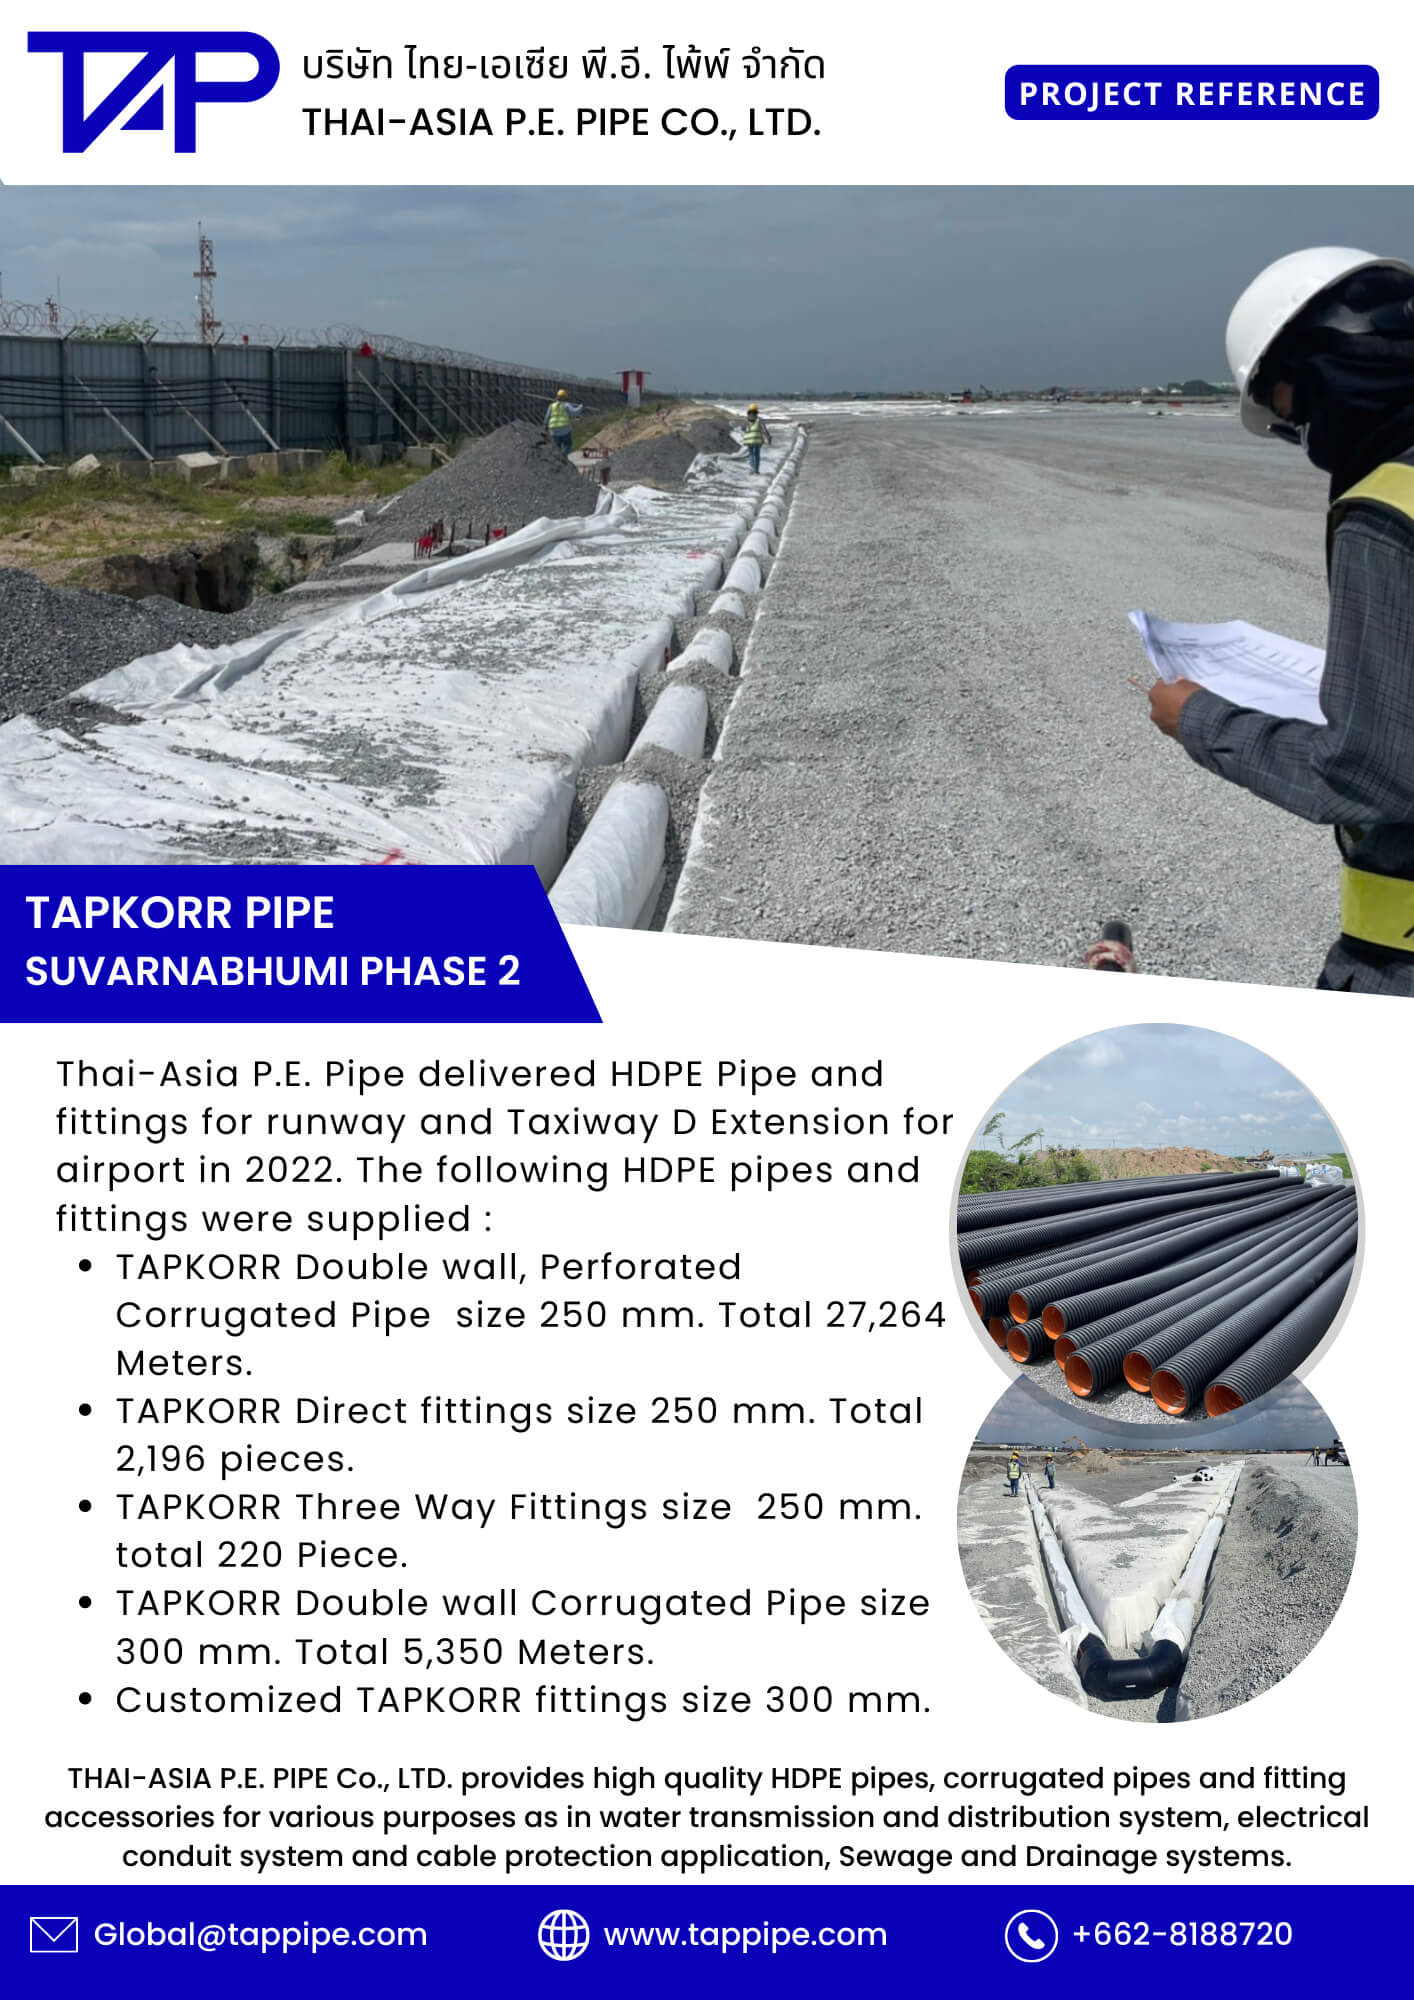 Infographic illustrating information about the corrugated pipe ( TAPKORR ) used in Suvarnabhumi Airport Phase 2